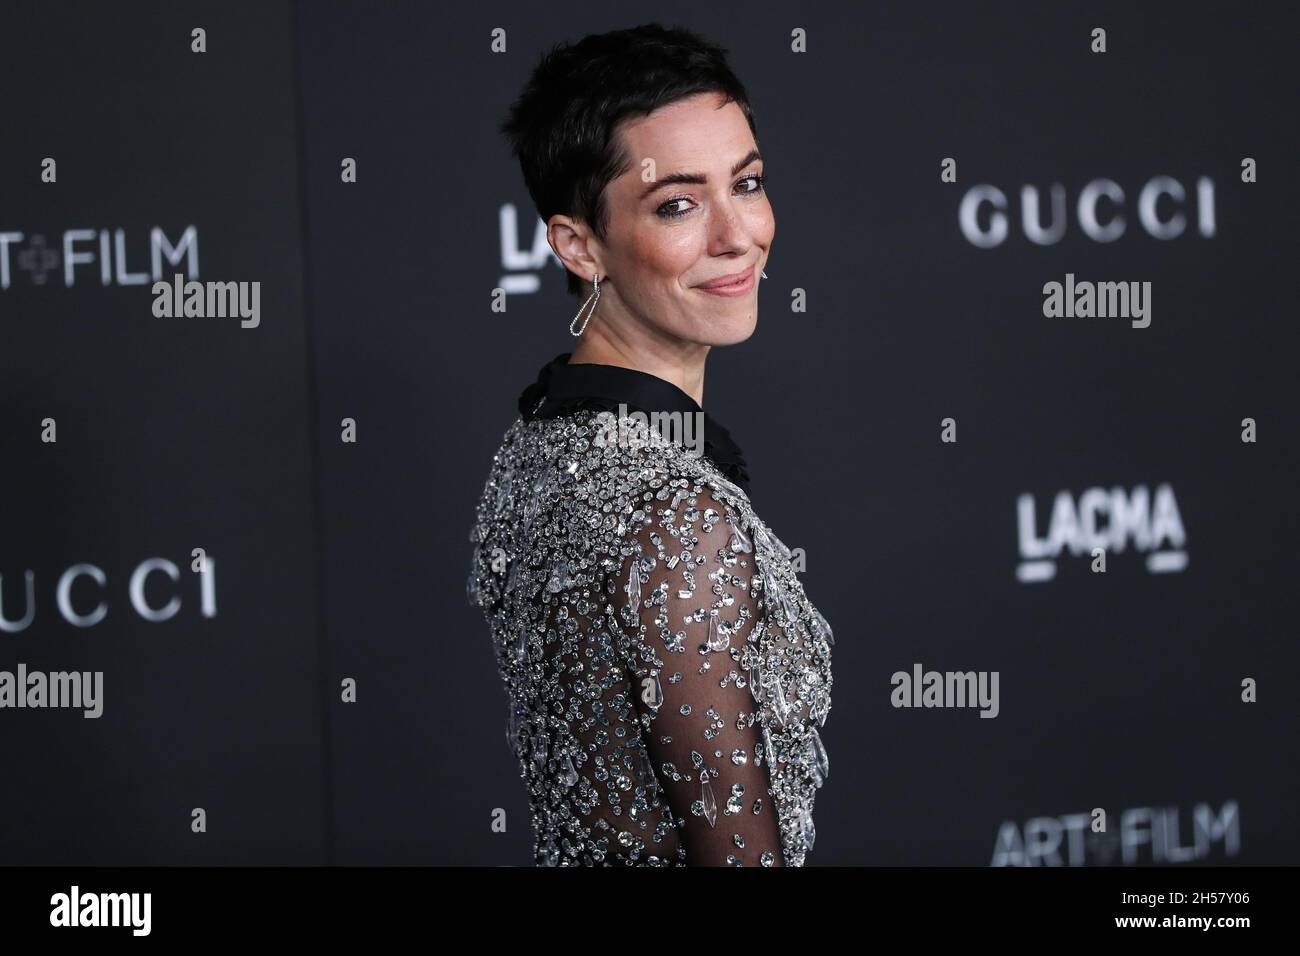 LOS ANGELES, CALIFORNIA, USA - NOVEMBER 06: Actress Rebecca Hall wearing a Miu Miu dress arrives at the 10th Annual LACMA Art + Film Gala 2021 held at the Los Angeles County Museum of Art on November 6, 2021 in Los Angeles, California, United States. (Photo by Xavier Collin/Image Press Agency/Sipa USA) Stock Photo